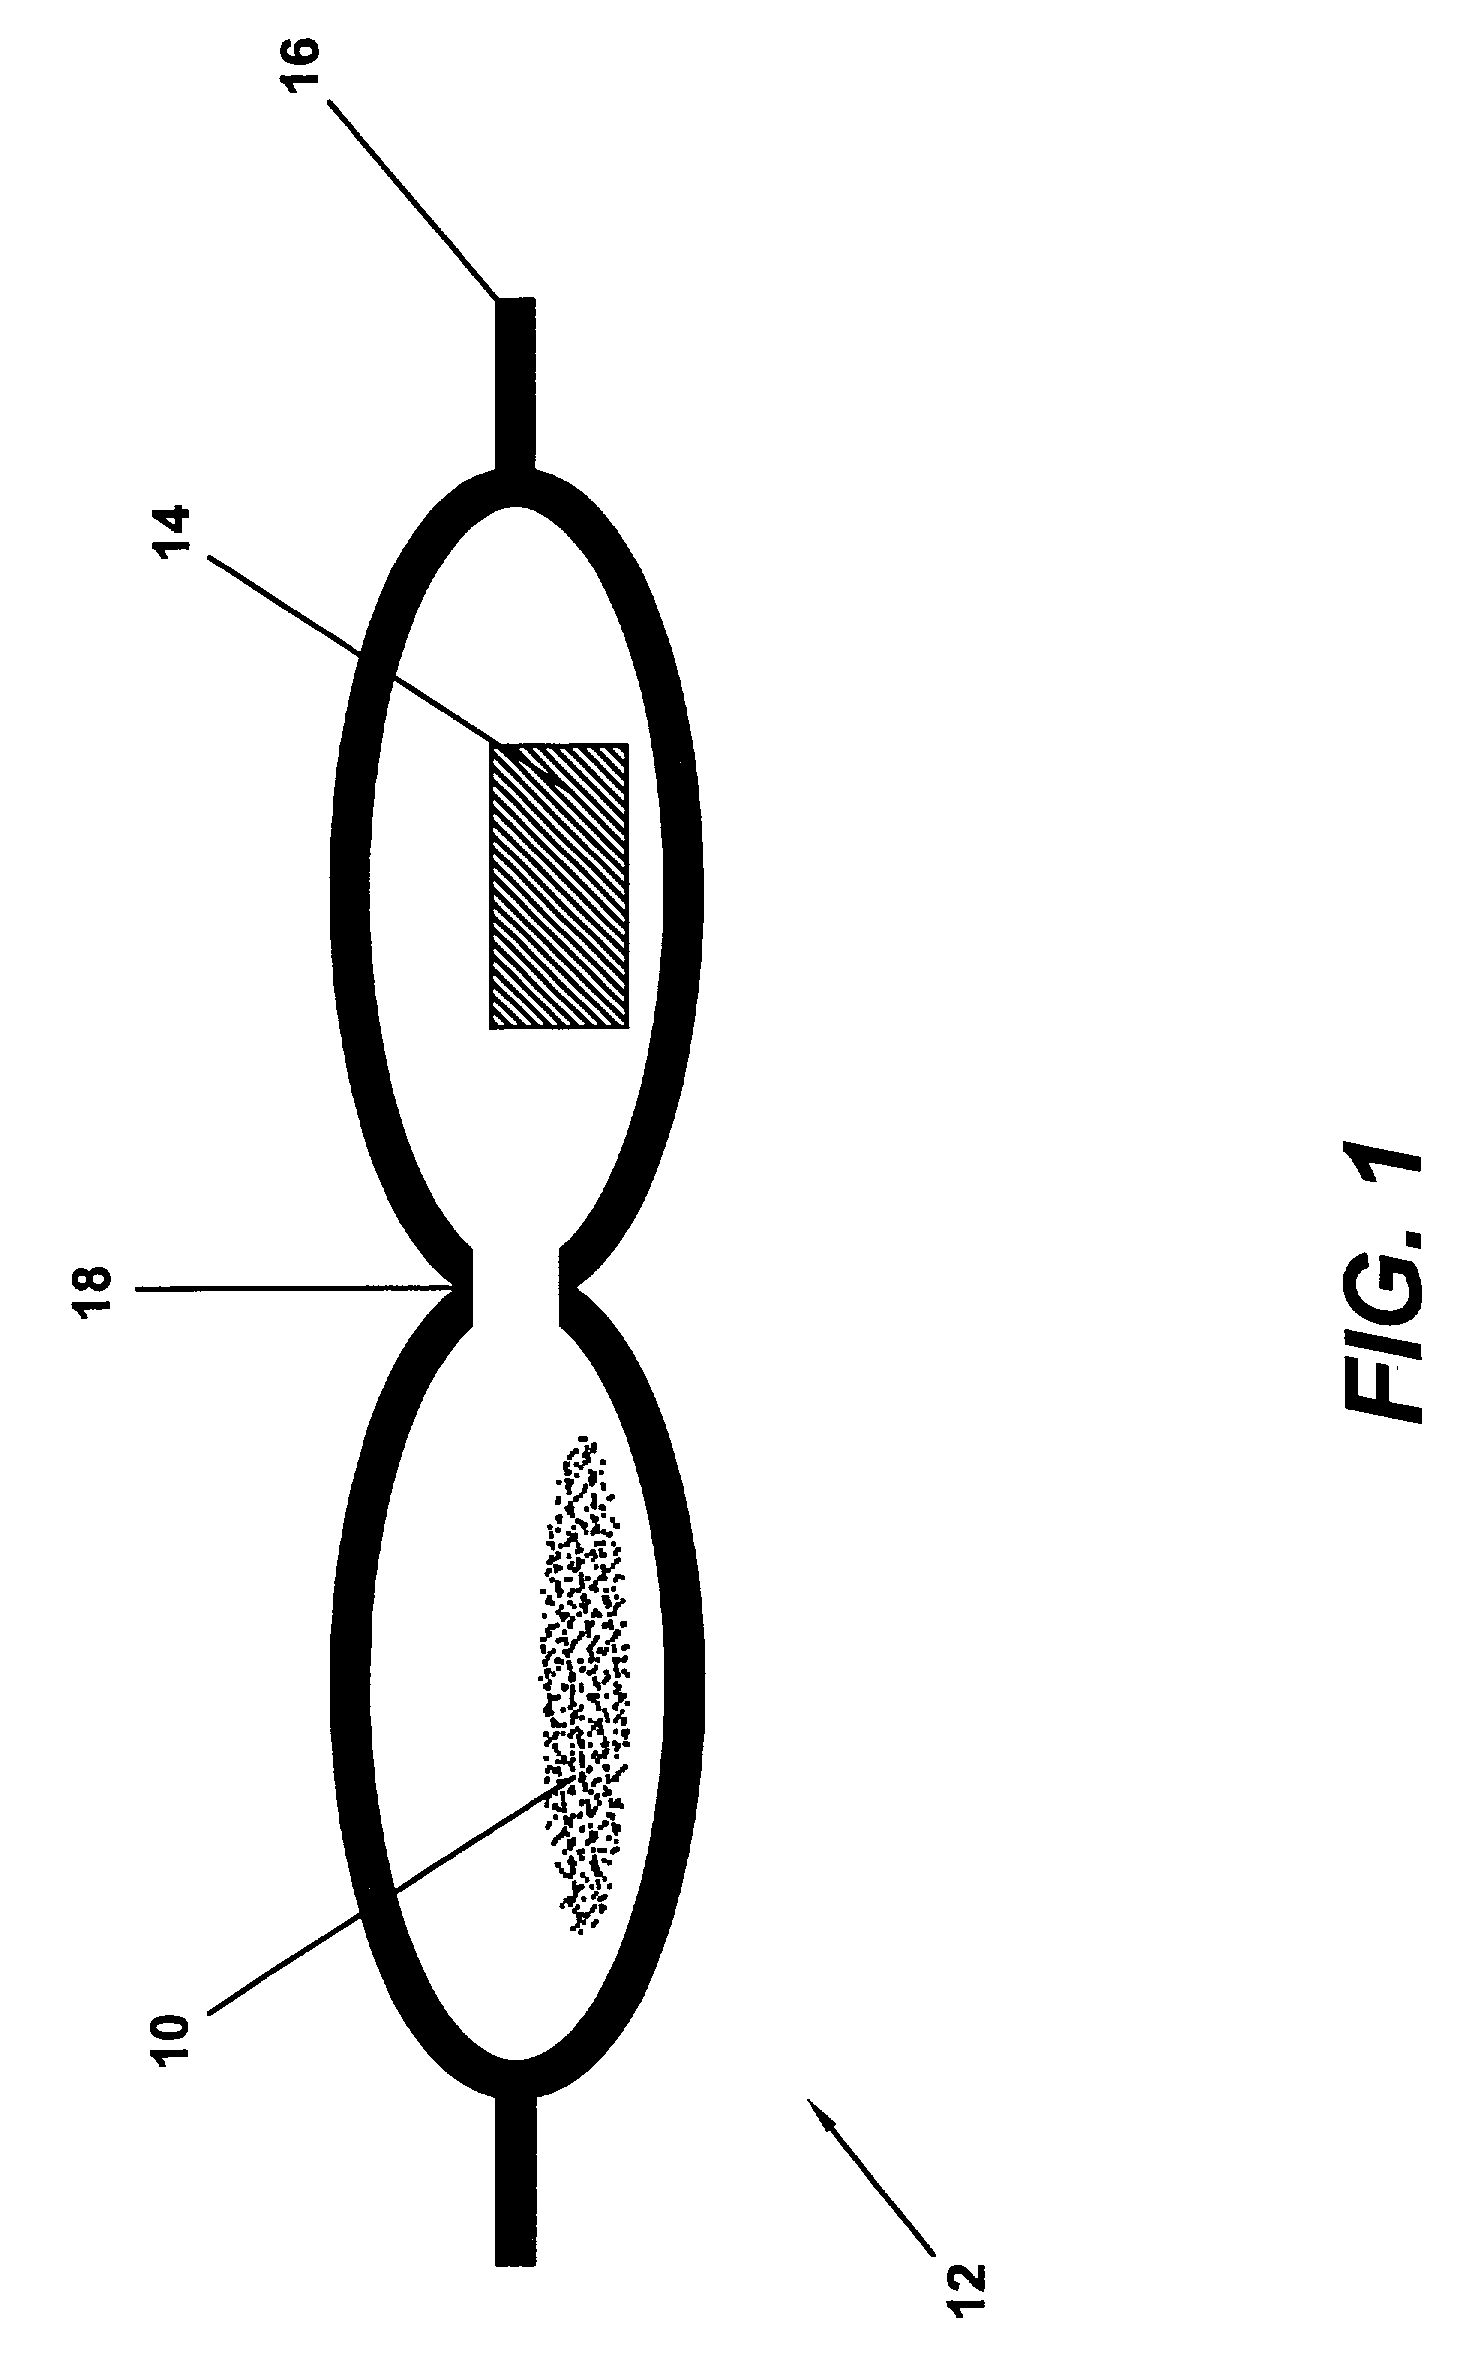 Shaped microcomponent via reactive conversion of biologically-derived microtemplates